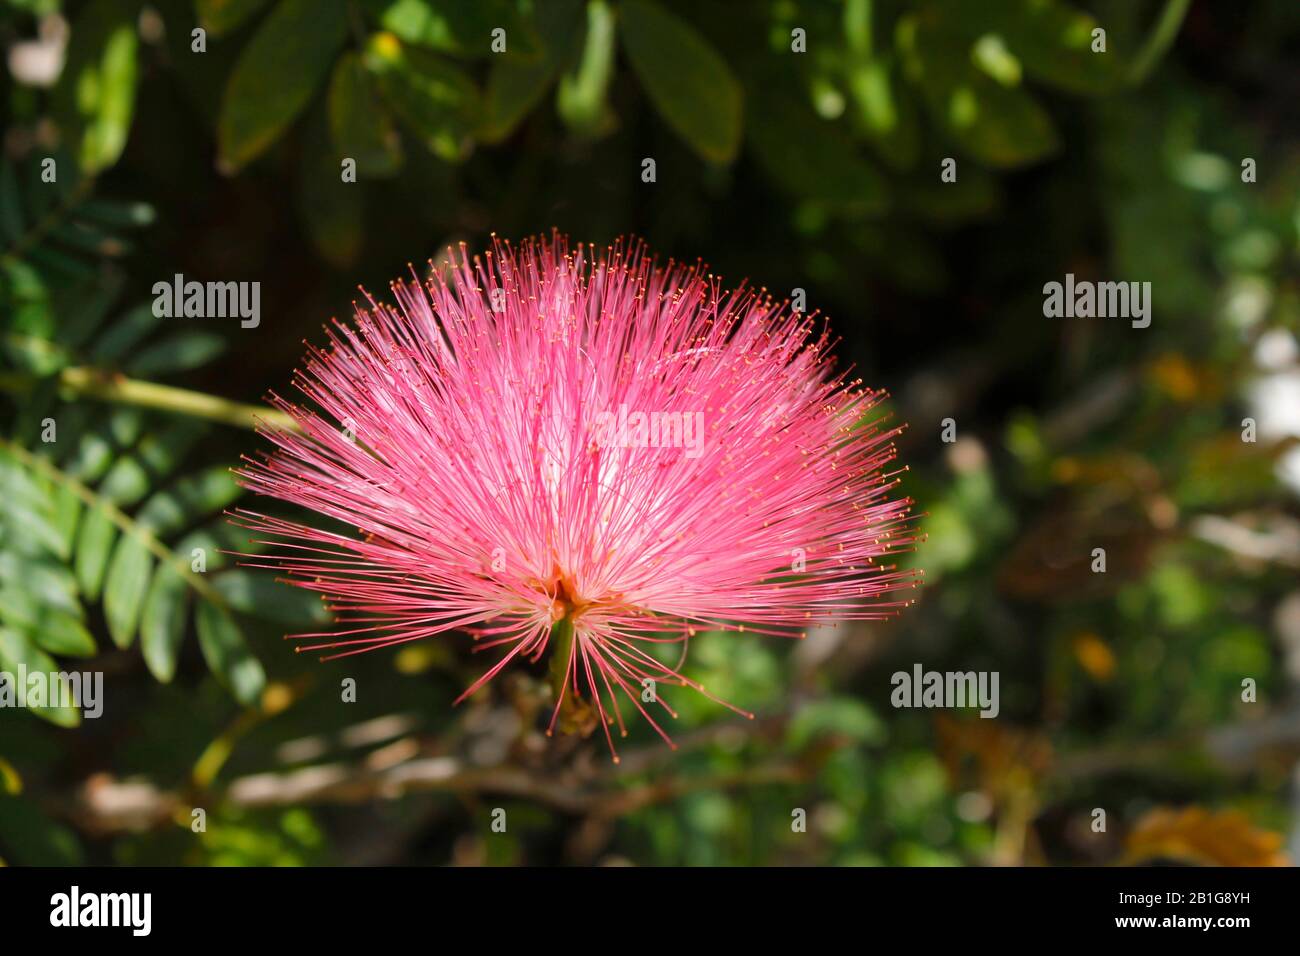 Pink original flower with long and thin petals Stock Photo